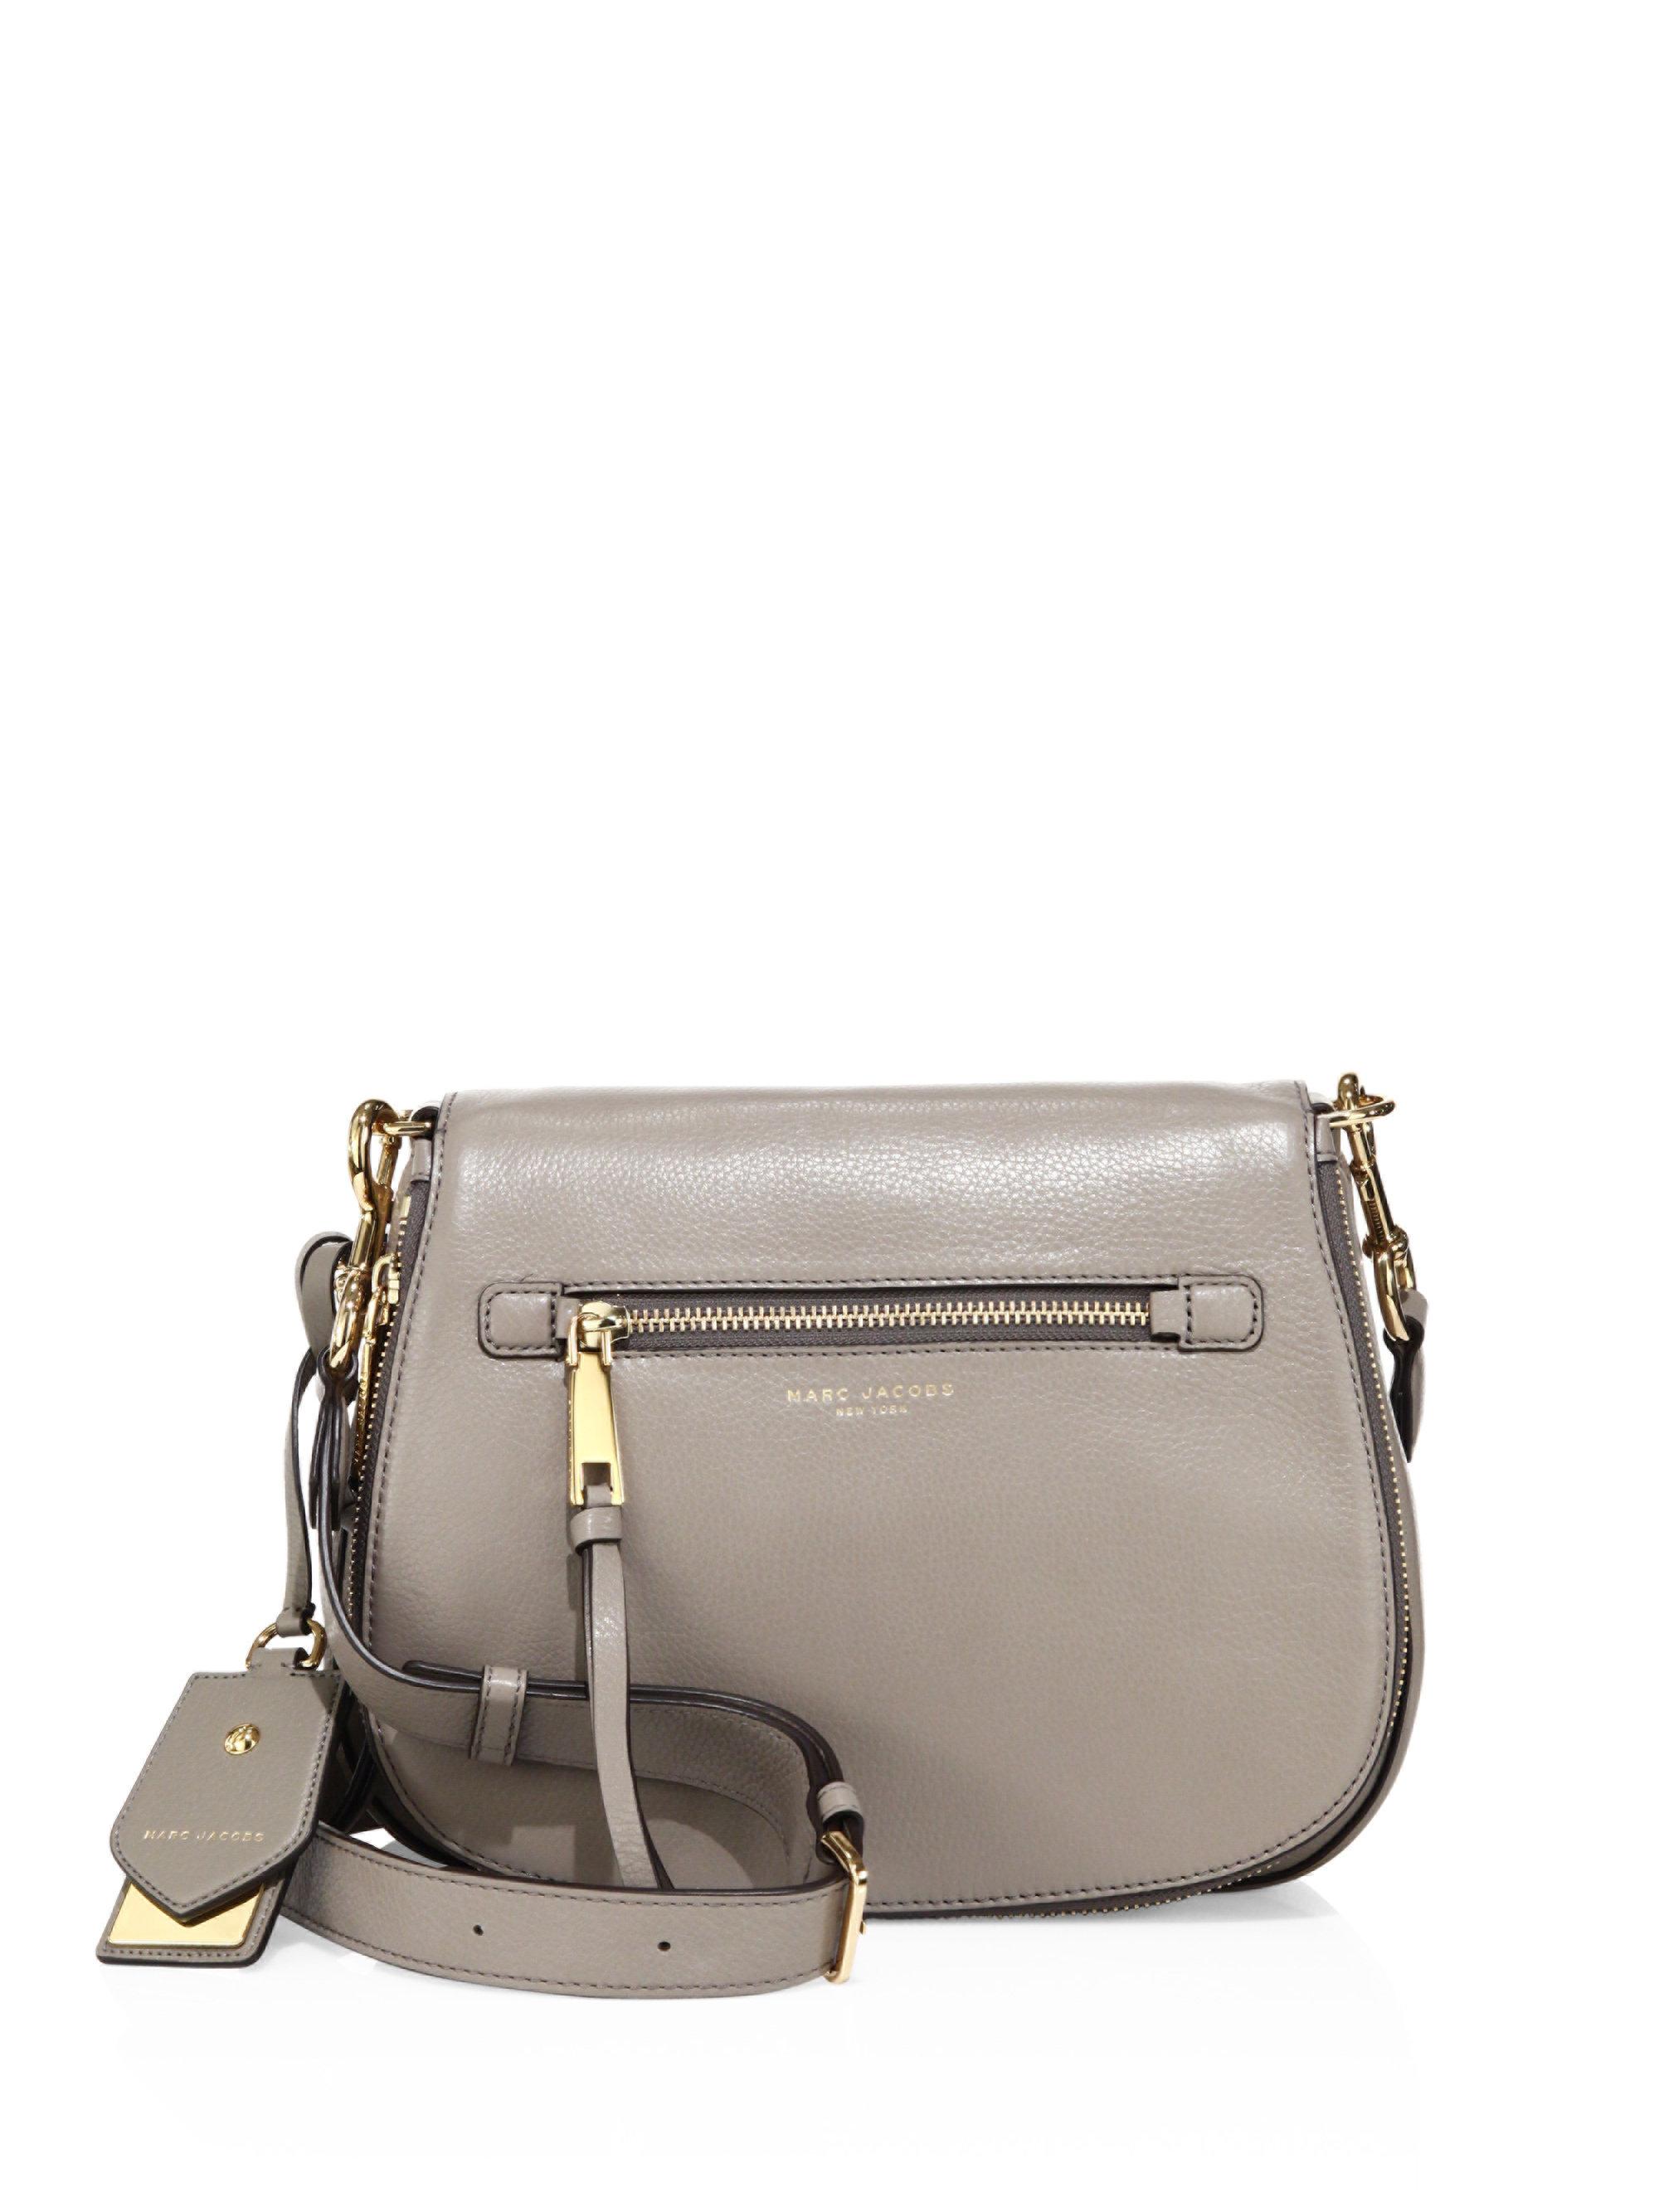 Lyst - Marc Jacobs Recruit Leather Saddle Bag in Gray